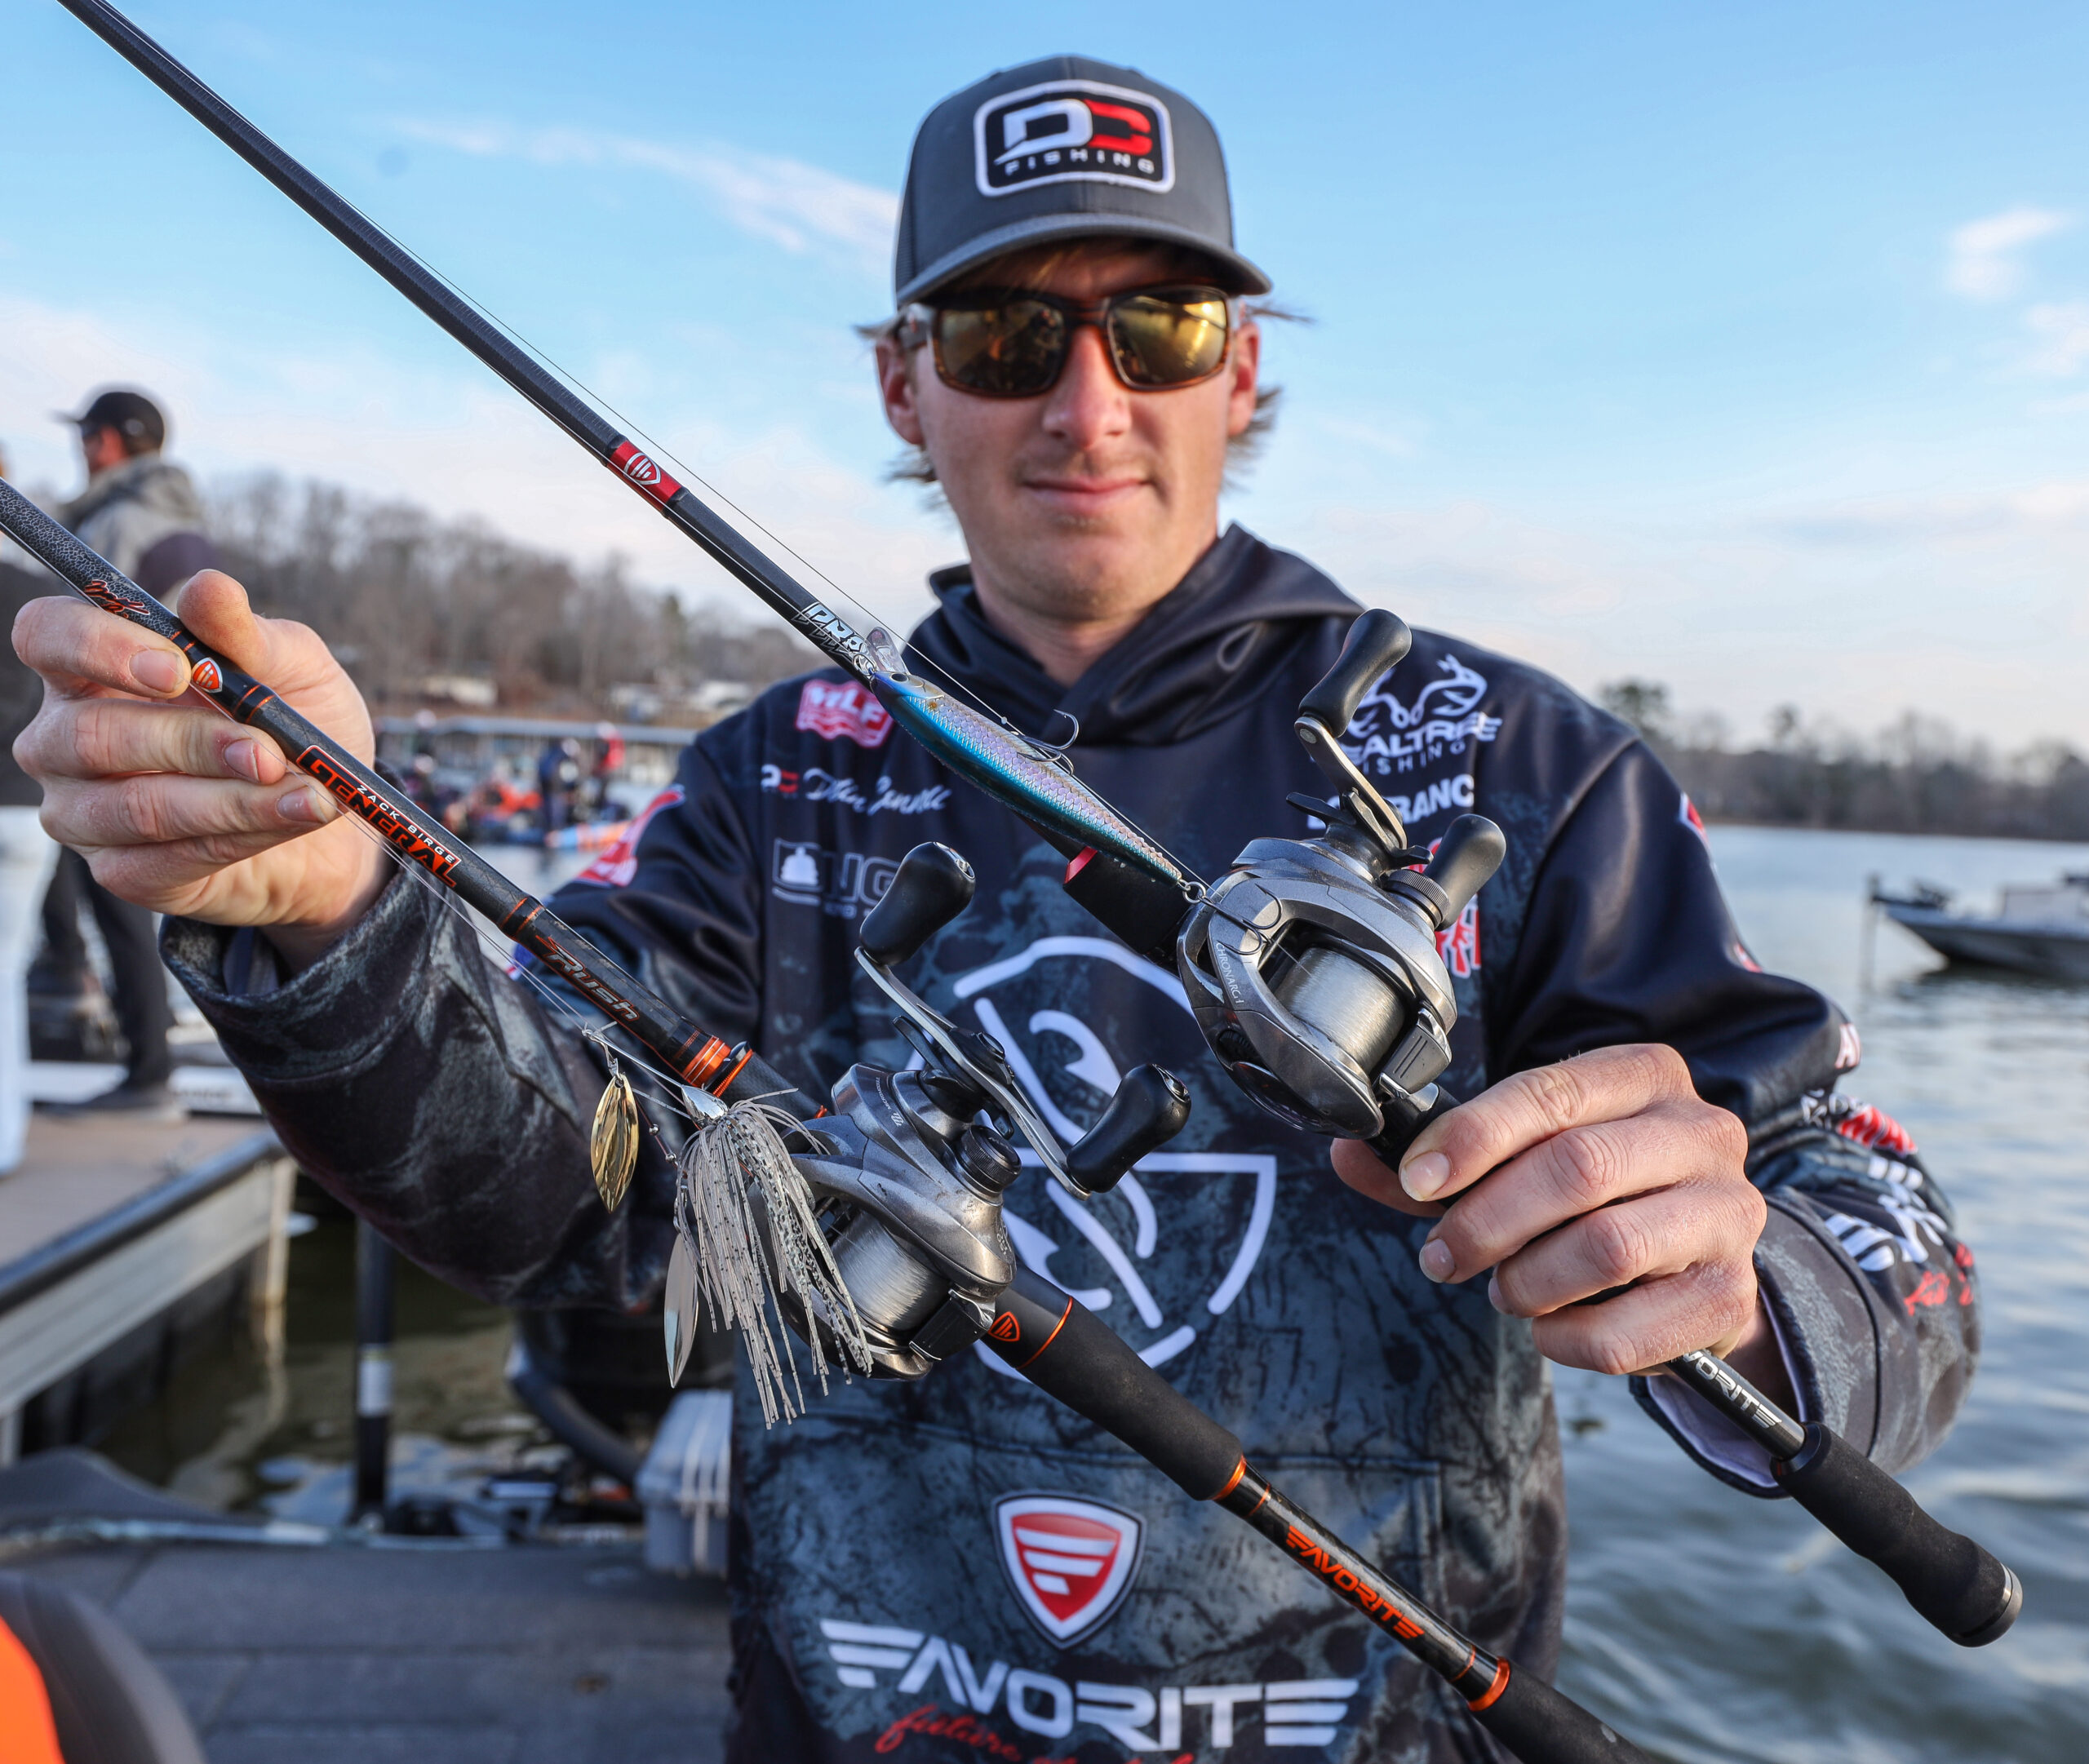 Spotted Bass 101 with Favorite Pro Dustin Connell - Major League